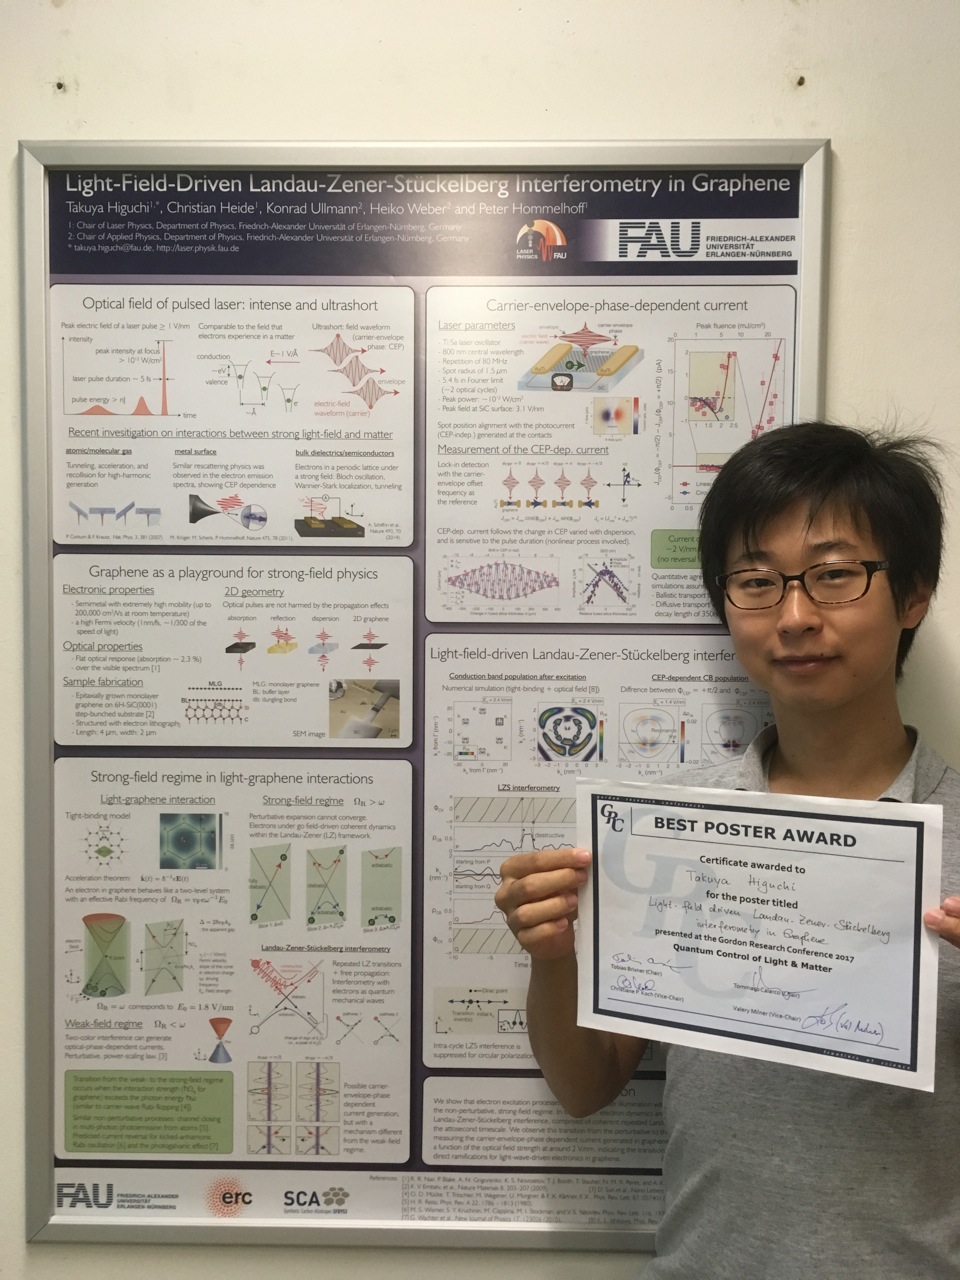 Towards entry "Poster award for Dr. Takuya Higuchi at Gordon Research Conference on Quantum Control of Light & Matter"